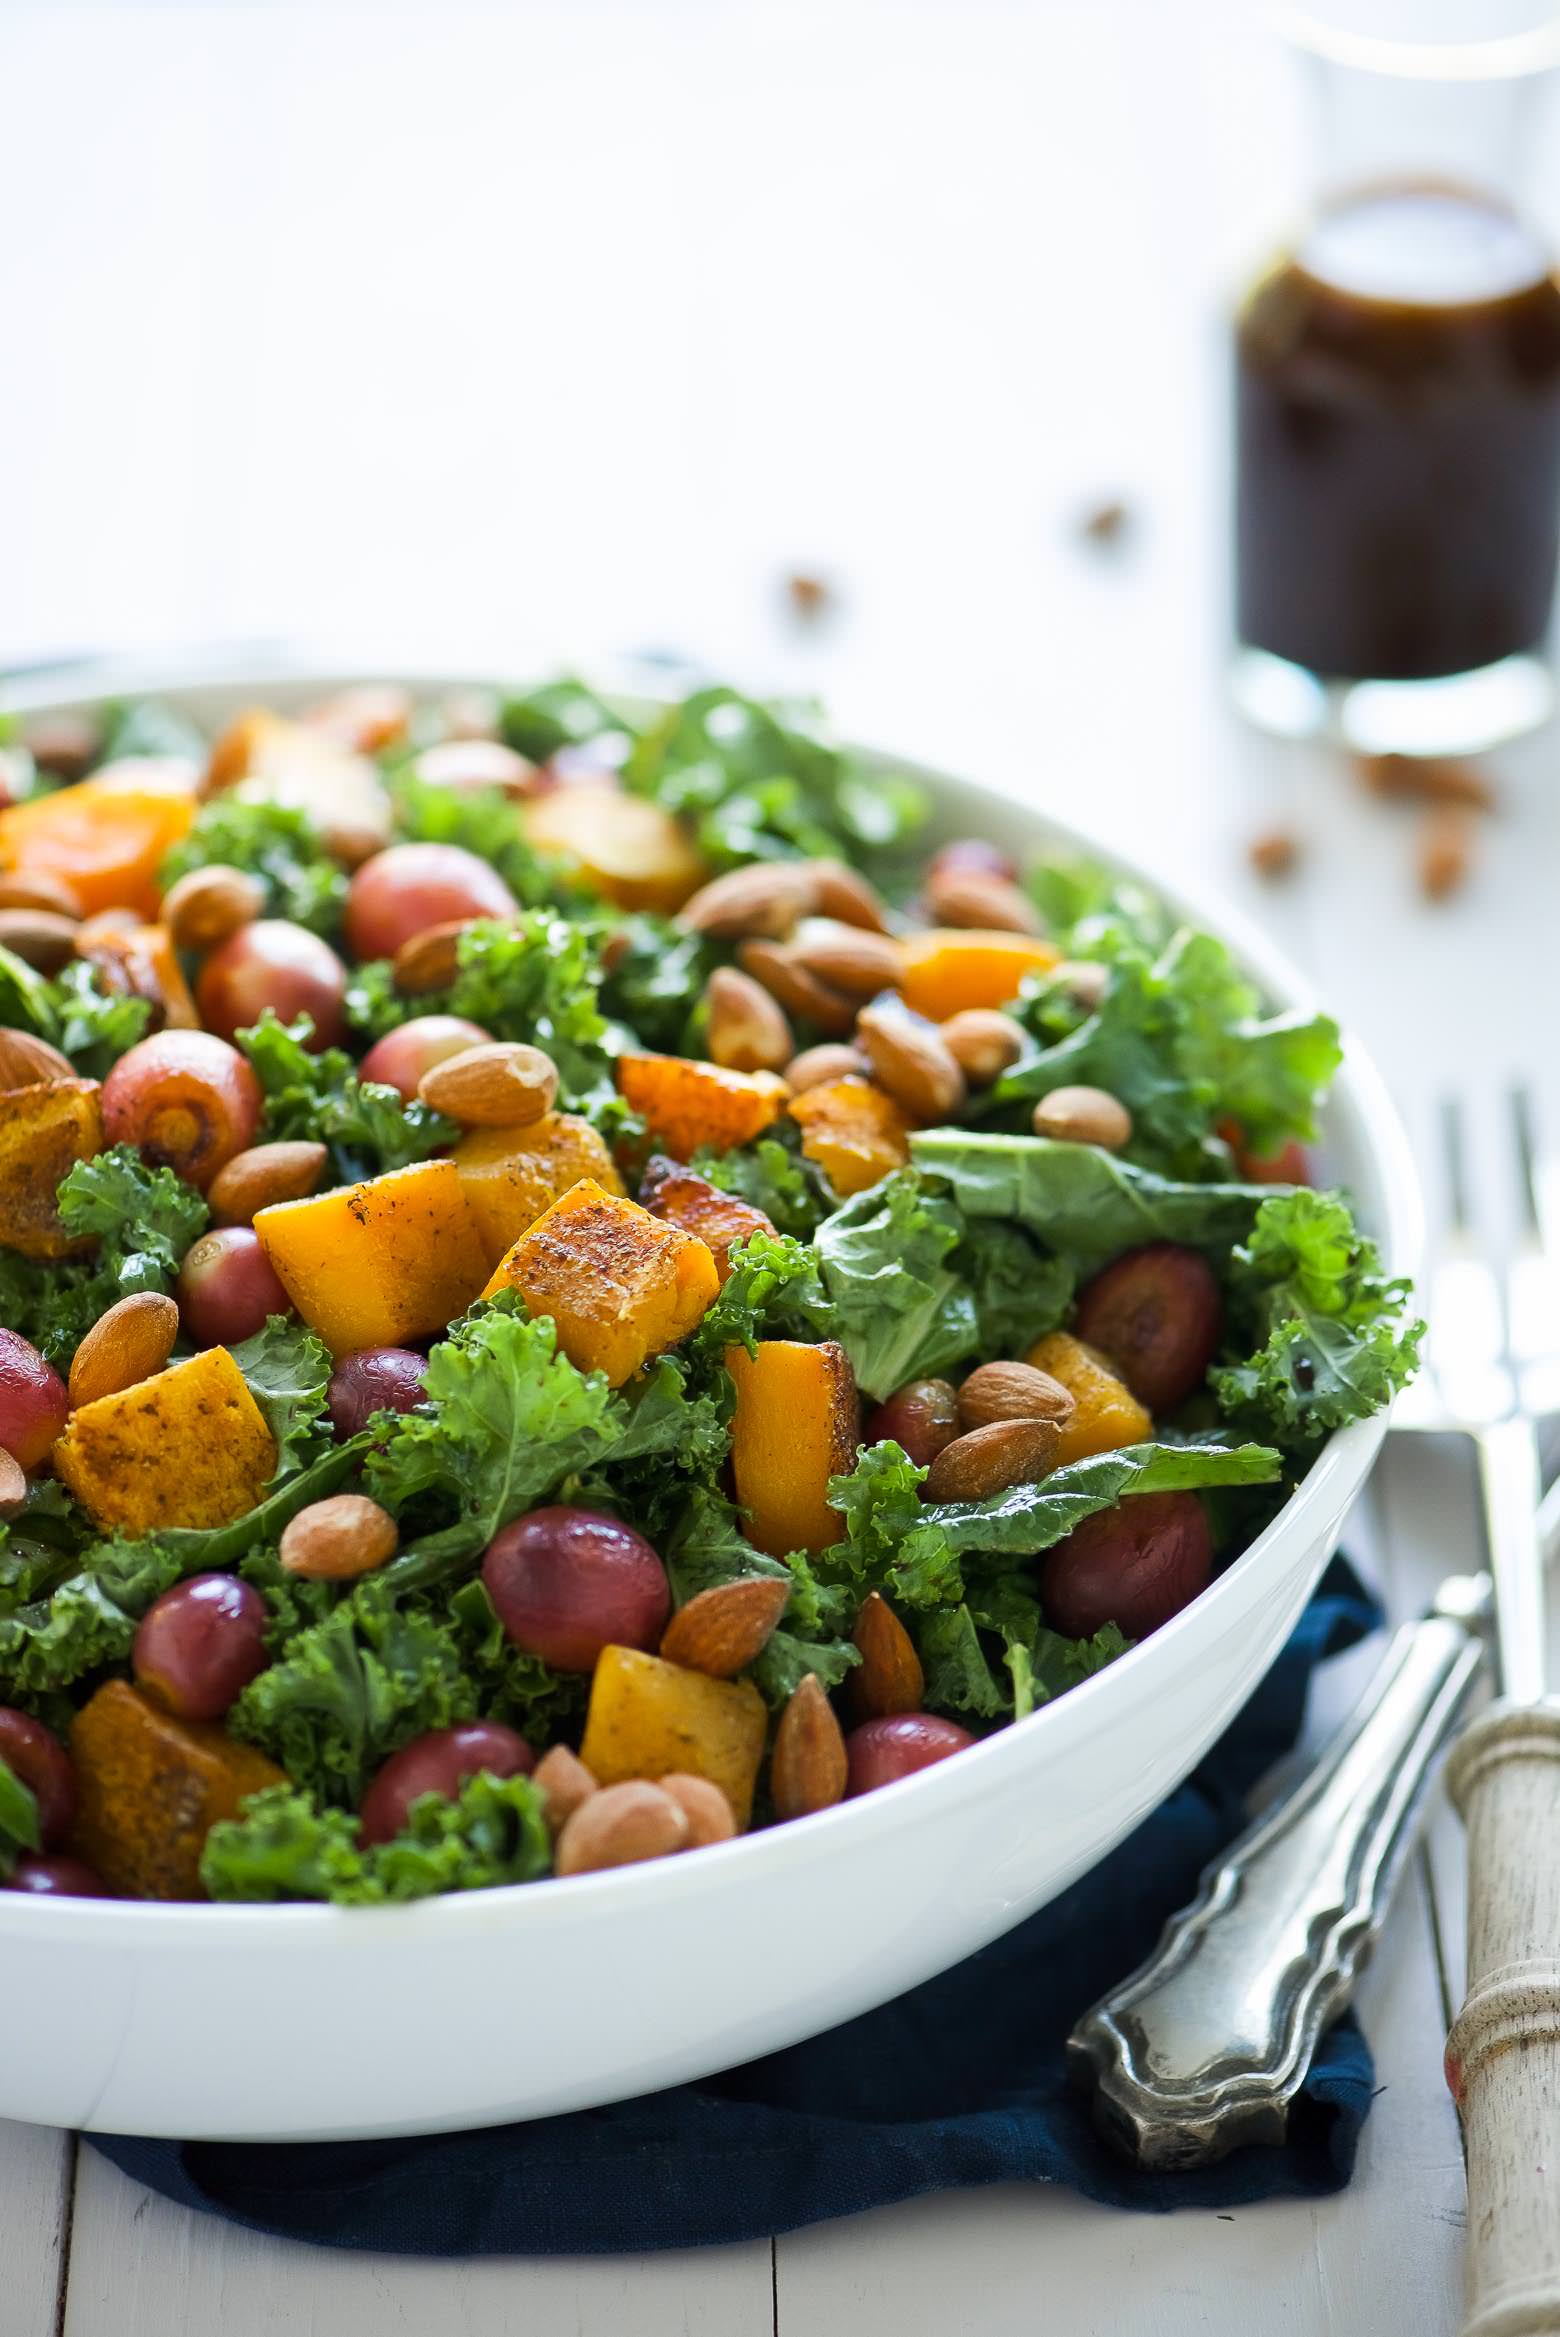 Massaged Kale Salad with Butternut Squash and Roasted Grapes is fall in a dish! It is healthy, simple and perfect for make-ahead lunches! Caramelized butternut squash and roasted grapes mix with balsamic massaged kale for a paleo and vegan friendly salad!